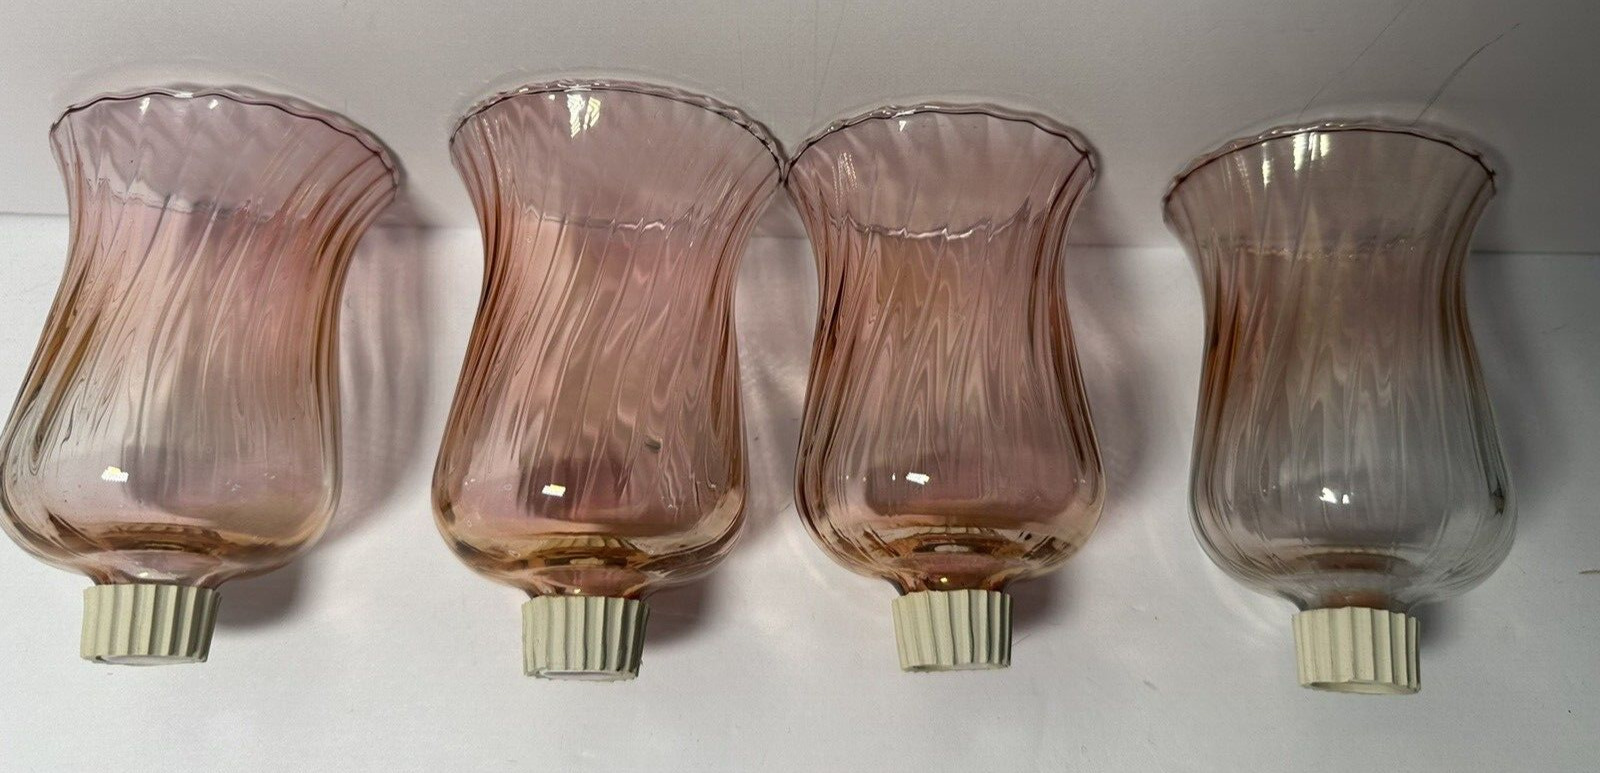 New PARTYLITE ROSE RIDGE  PEGLITE Glass Votive CANDLEHOLDER Cup PINK  Set of 4